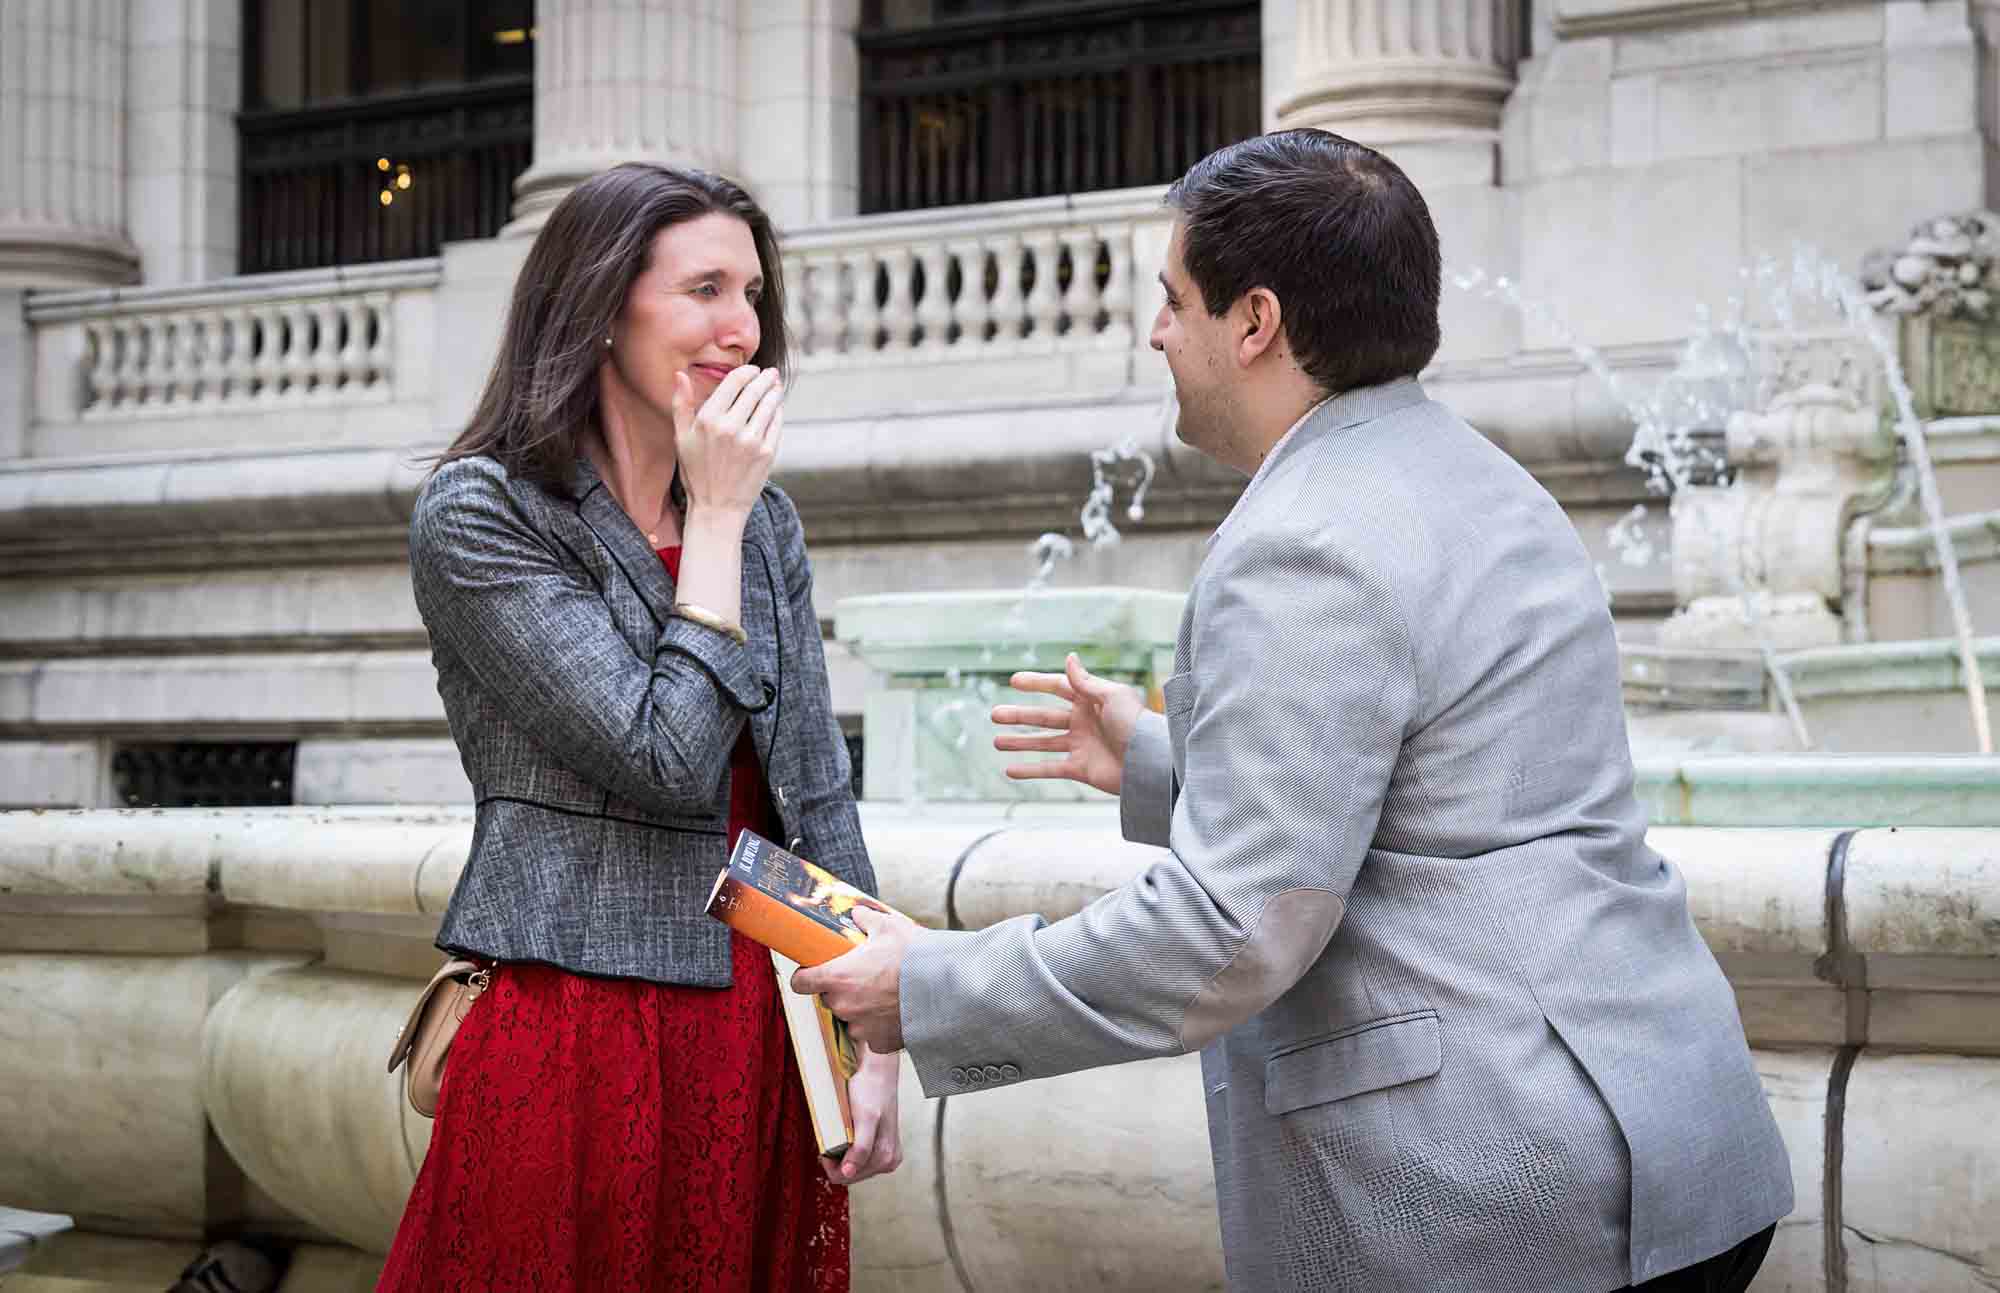 Woman in red dress about to cry in front of man wearing grey jacket during New York Public Library proposal